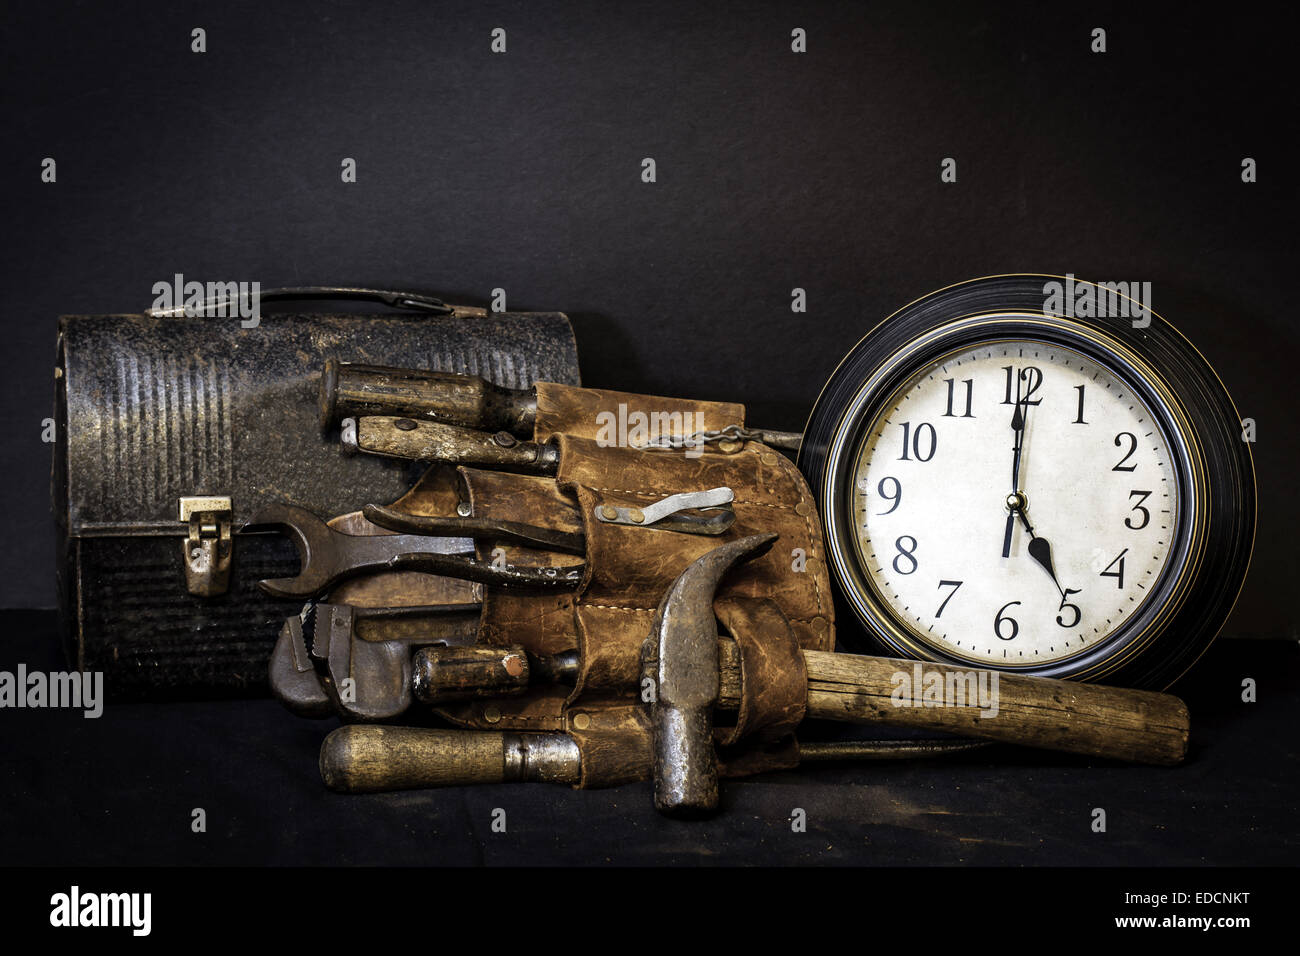 Quittin time.  Vintage tool belt and lunch box with tools and clock showing 5 o'clock. Stock Photo